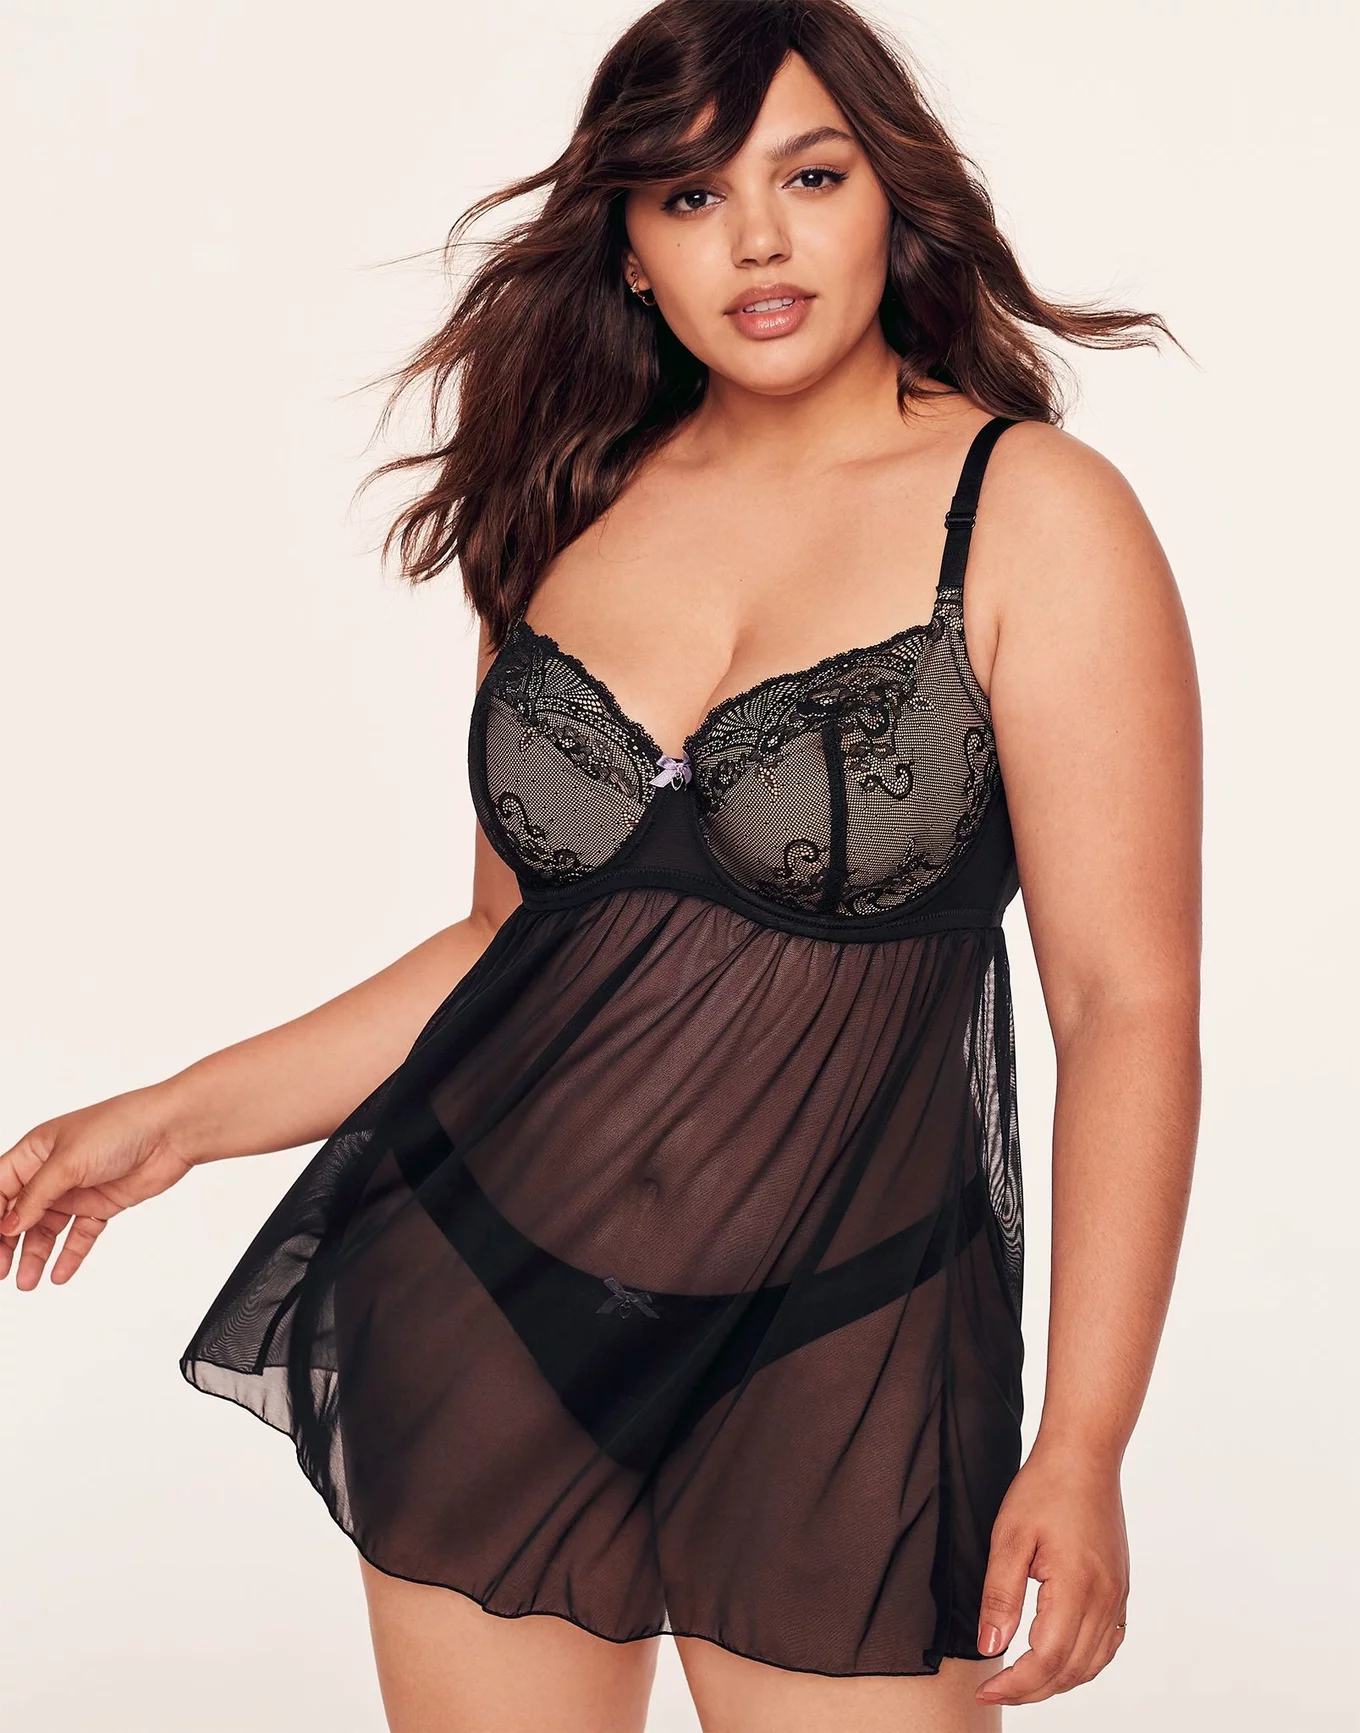 See Through Babydoll PLUS SIZE, Big Size Lace Lingerie, Sheer